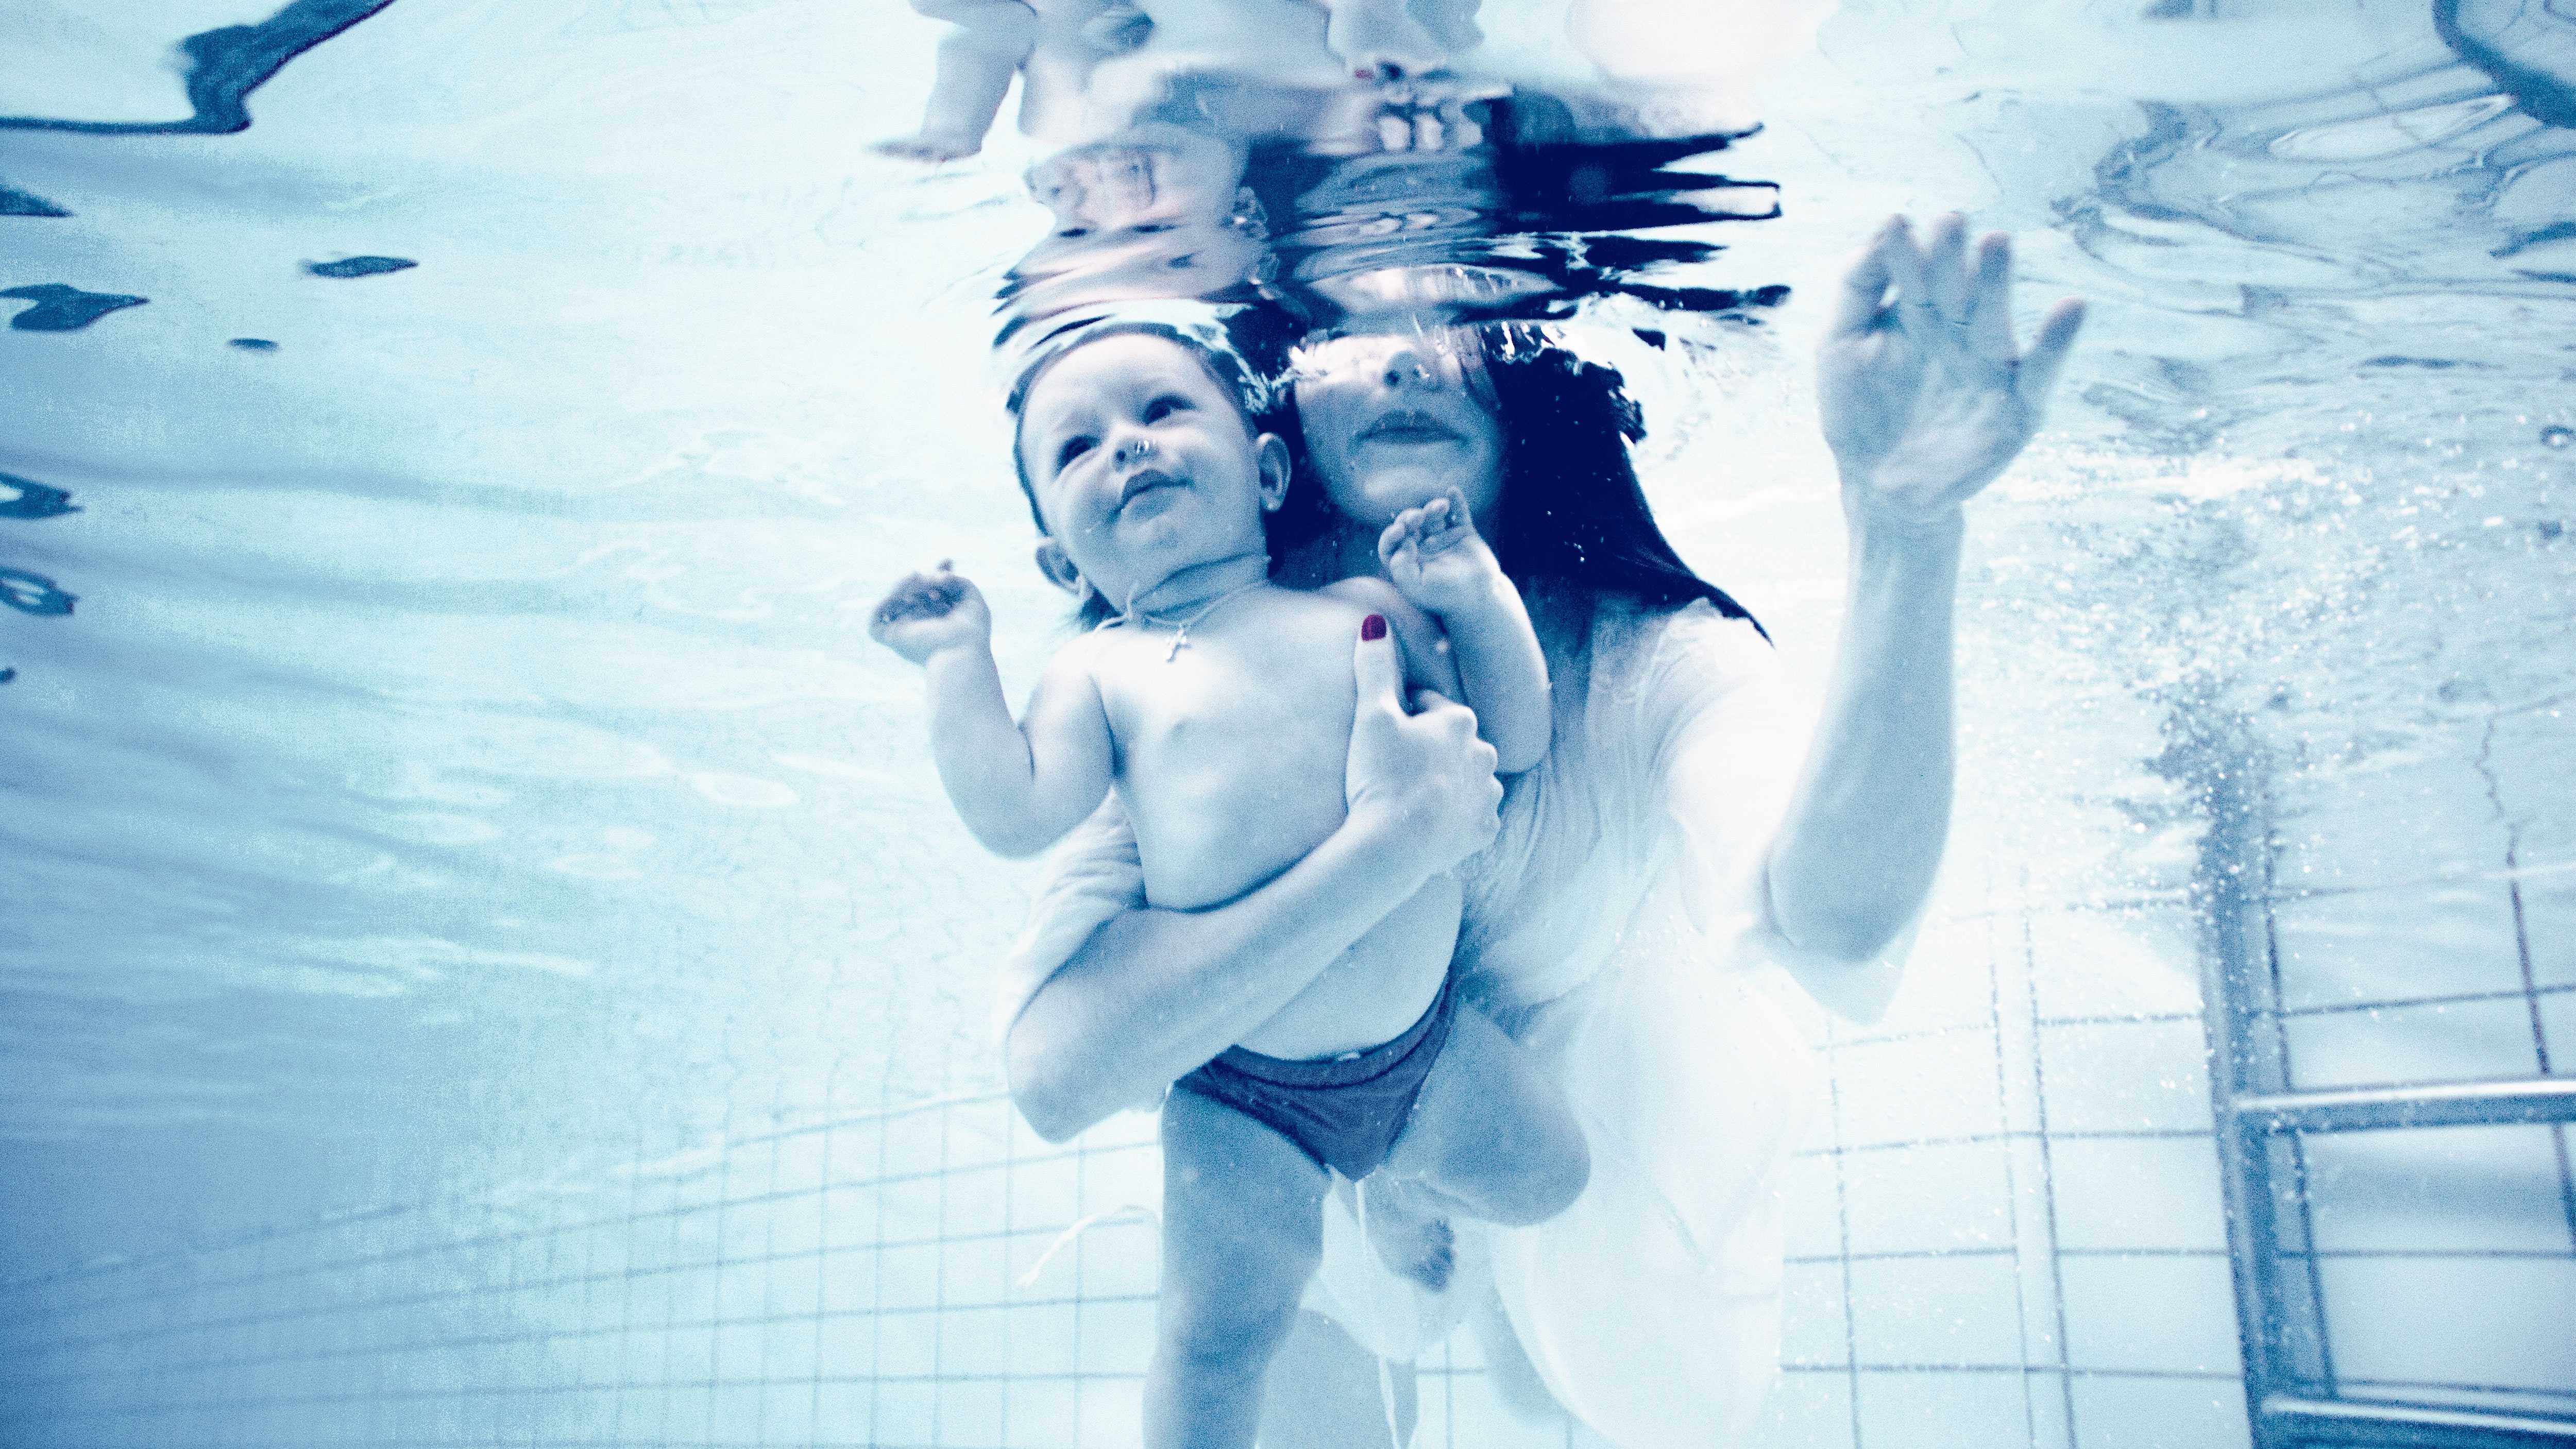 Underwater with a kid photo